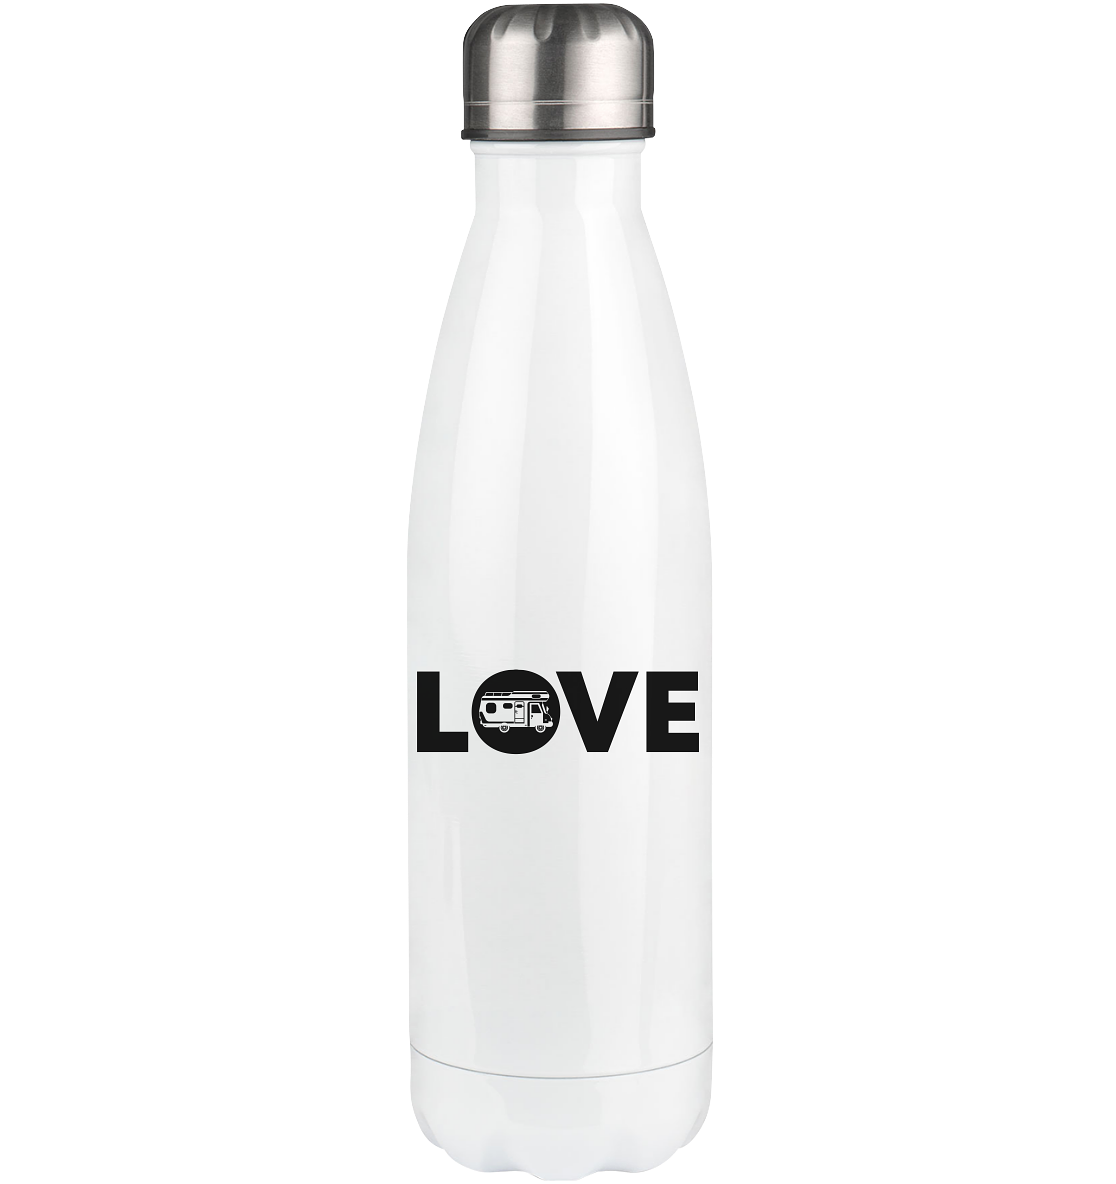 Love - Edelstahl Thermosflasche camping UONP 500ml